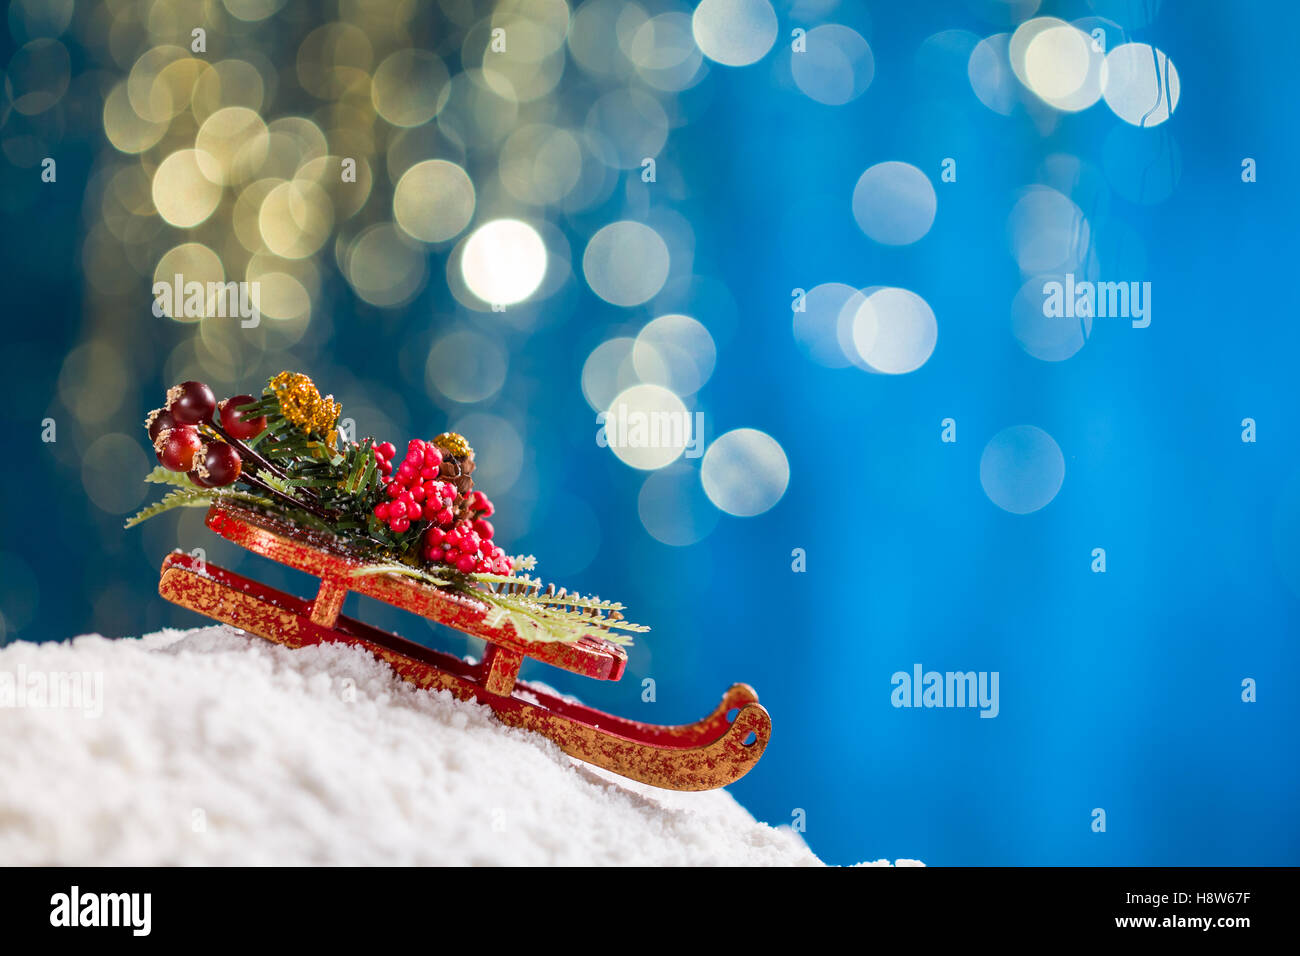 Sleigh with Christmas decoration on snow at blue background with gold glitter. Stock Photo